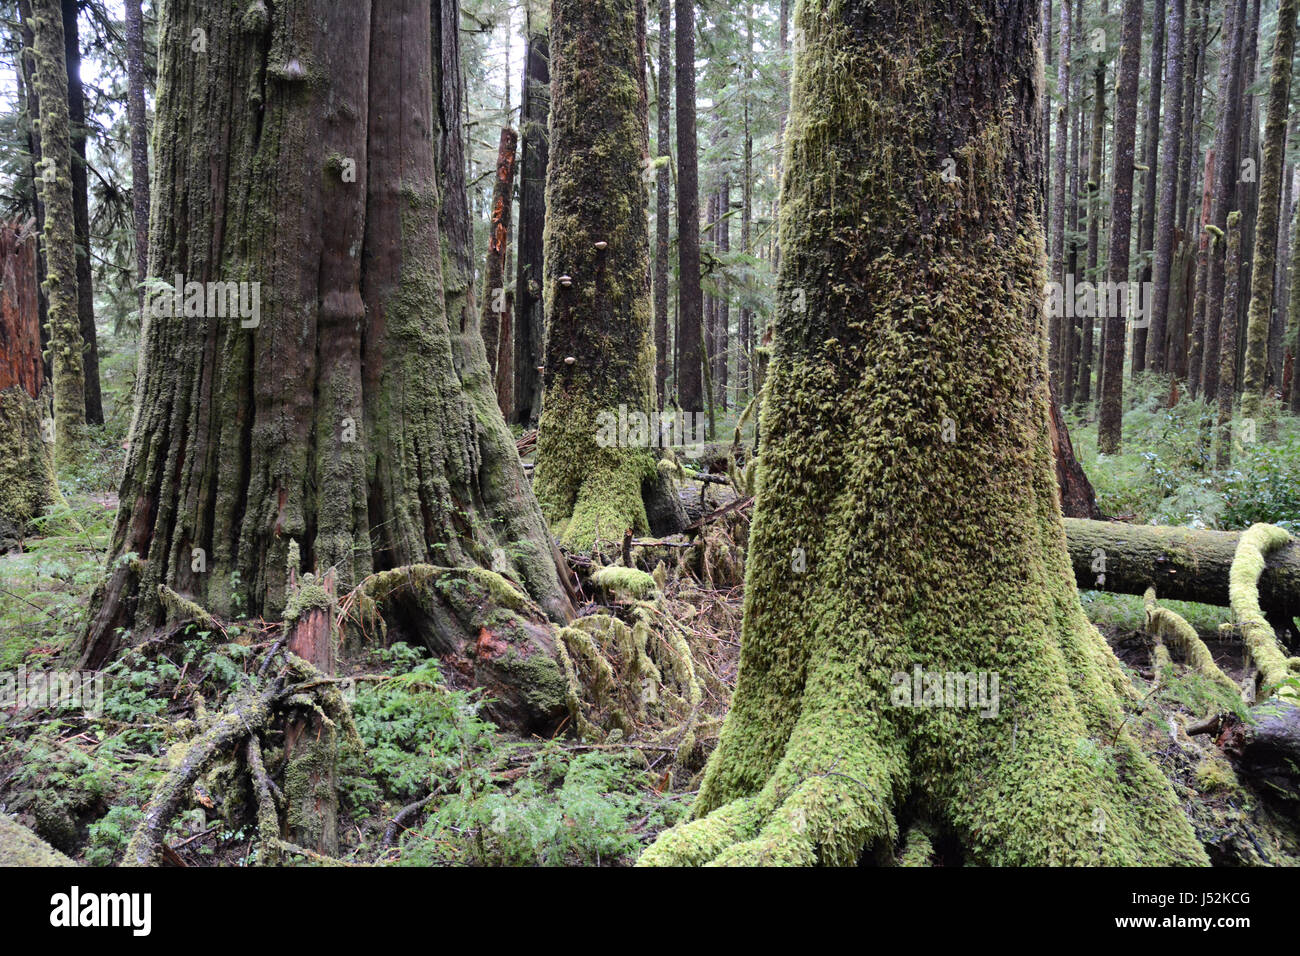 Ancient Western red cedars in a mossy, old growth forest near the town of Port Renfrew, Vancouver Island, British Columbia, Canada. Stock Photo